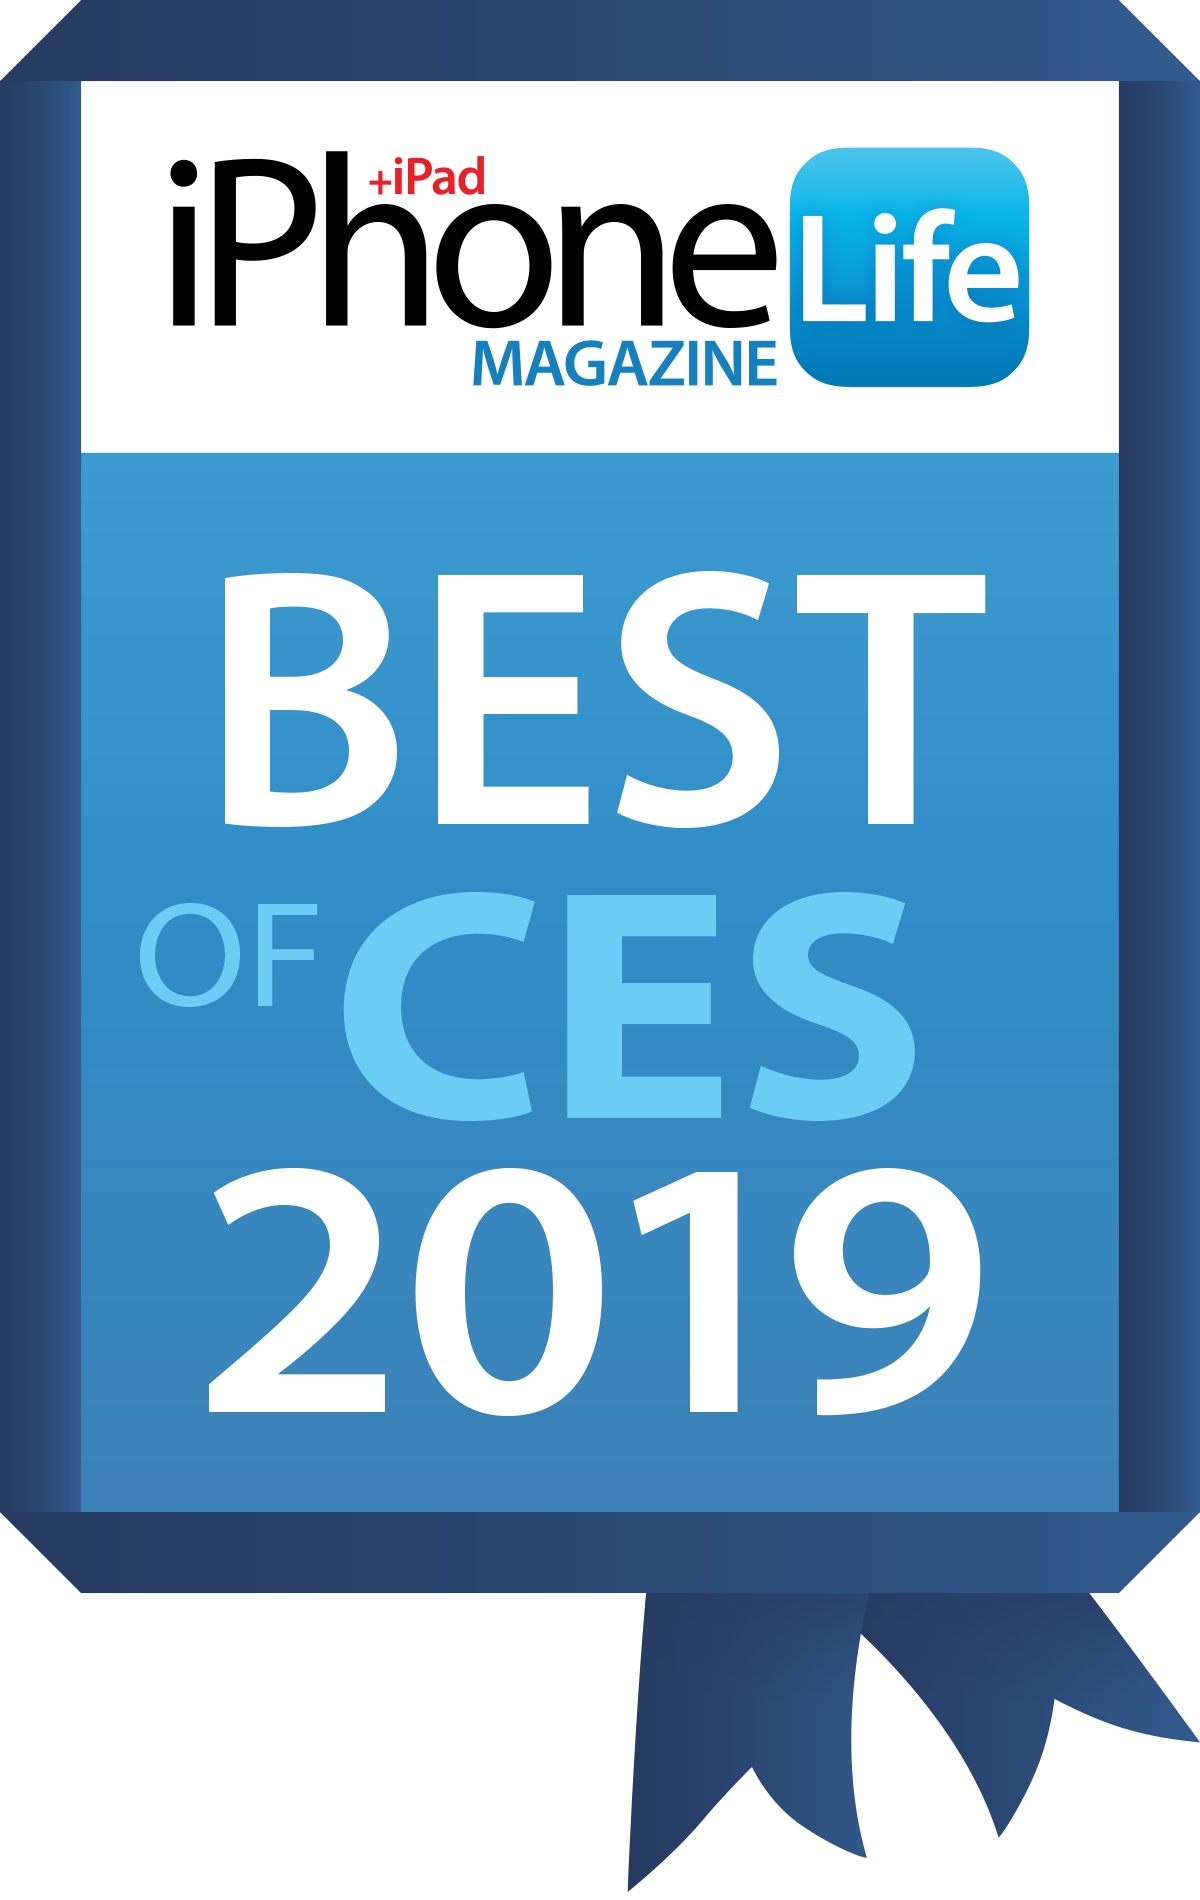 Triple W won the iPhone Life Best of CES 2019 Award for DFree®, the first health wearable device for urinary incontinence.